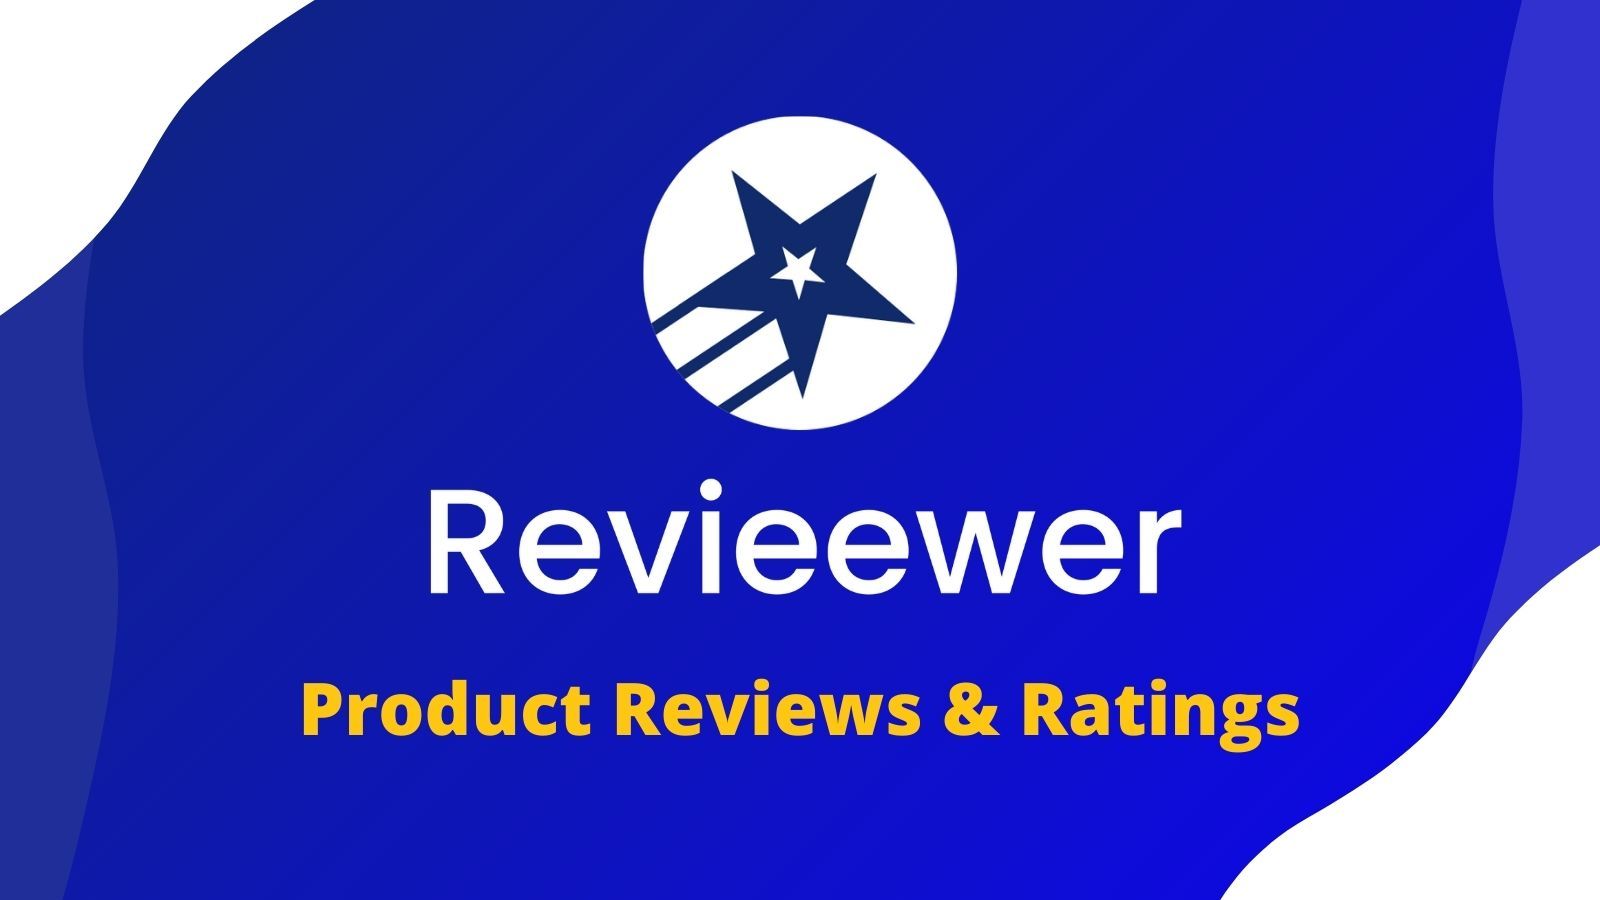 Product Reviews description for Revieewer's Review listing app